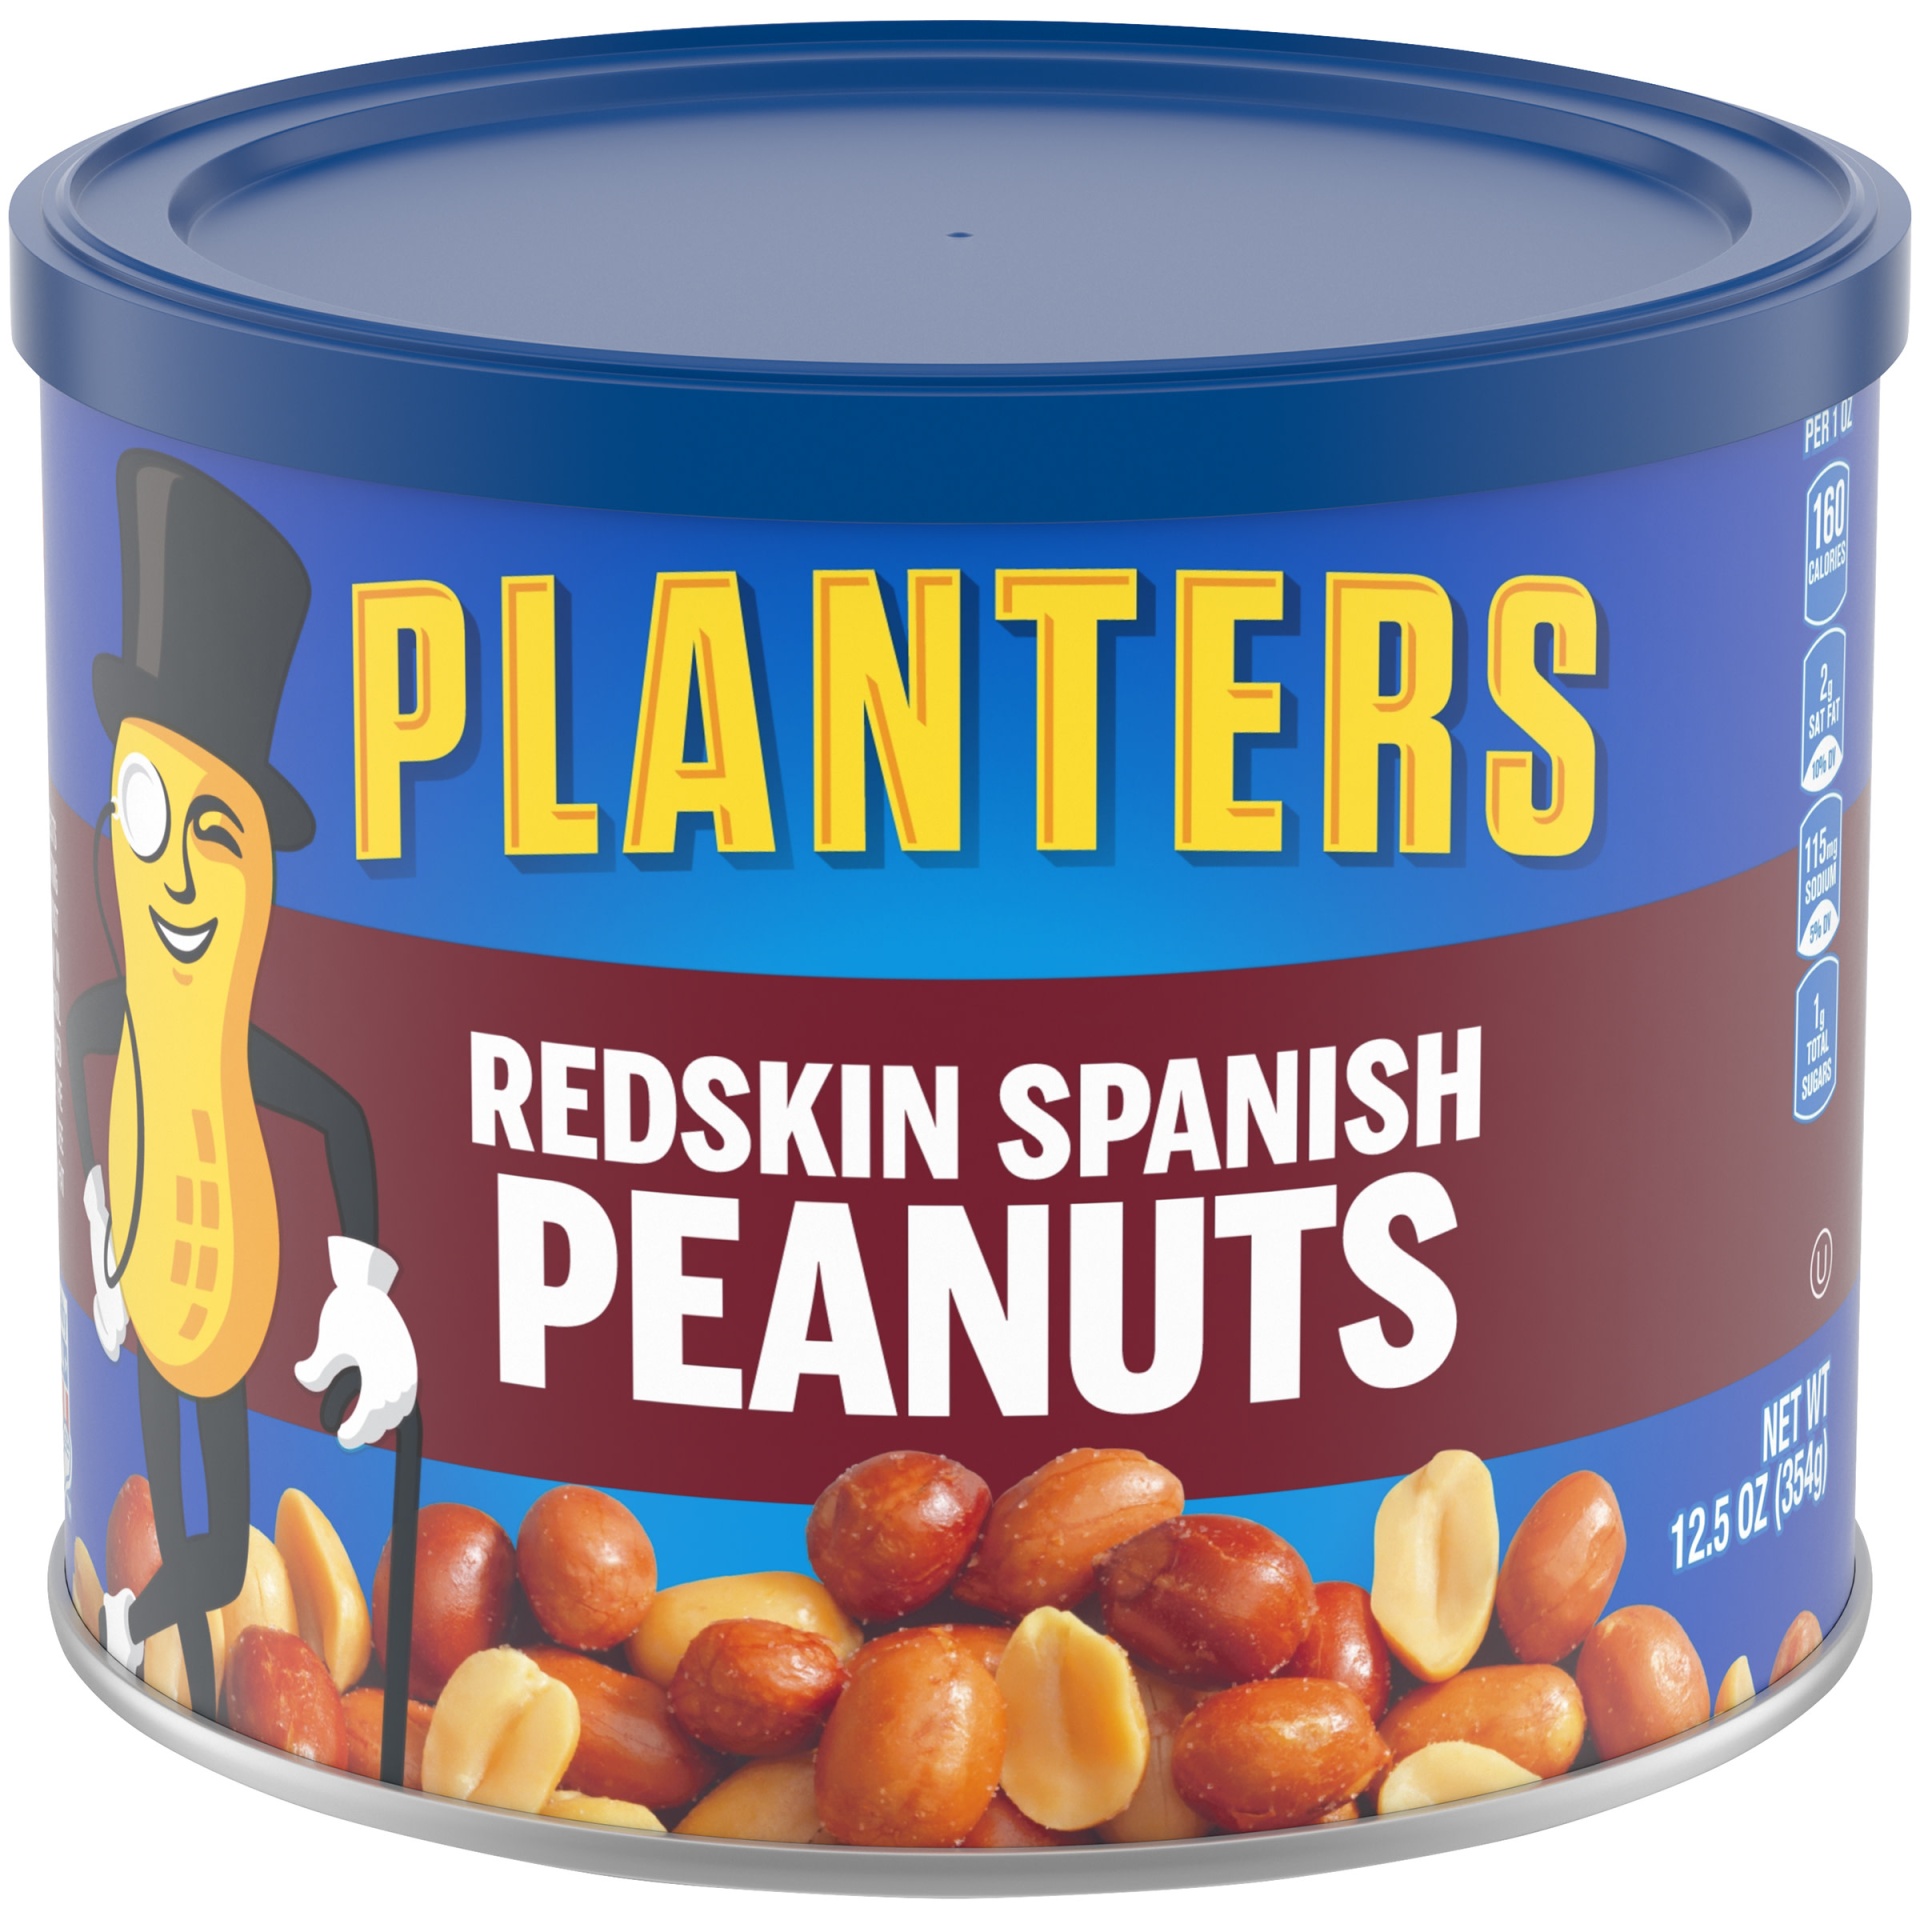 slide 1 of 2, Planters Redskin Spanish Peanuts,Canister, 12.5 oz